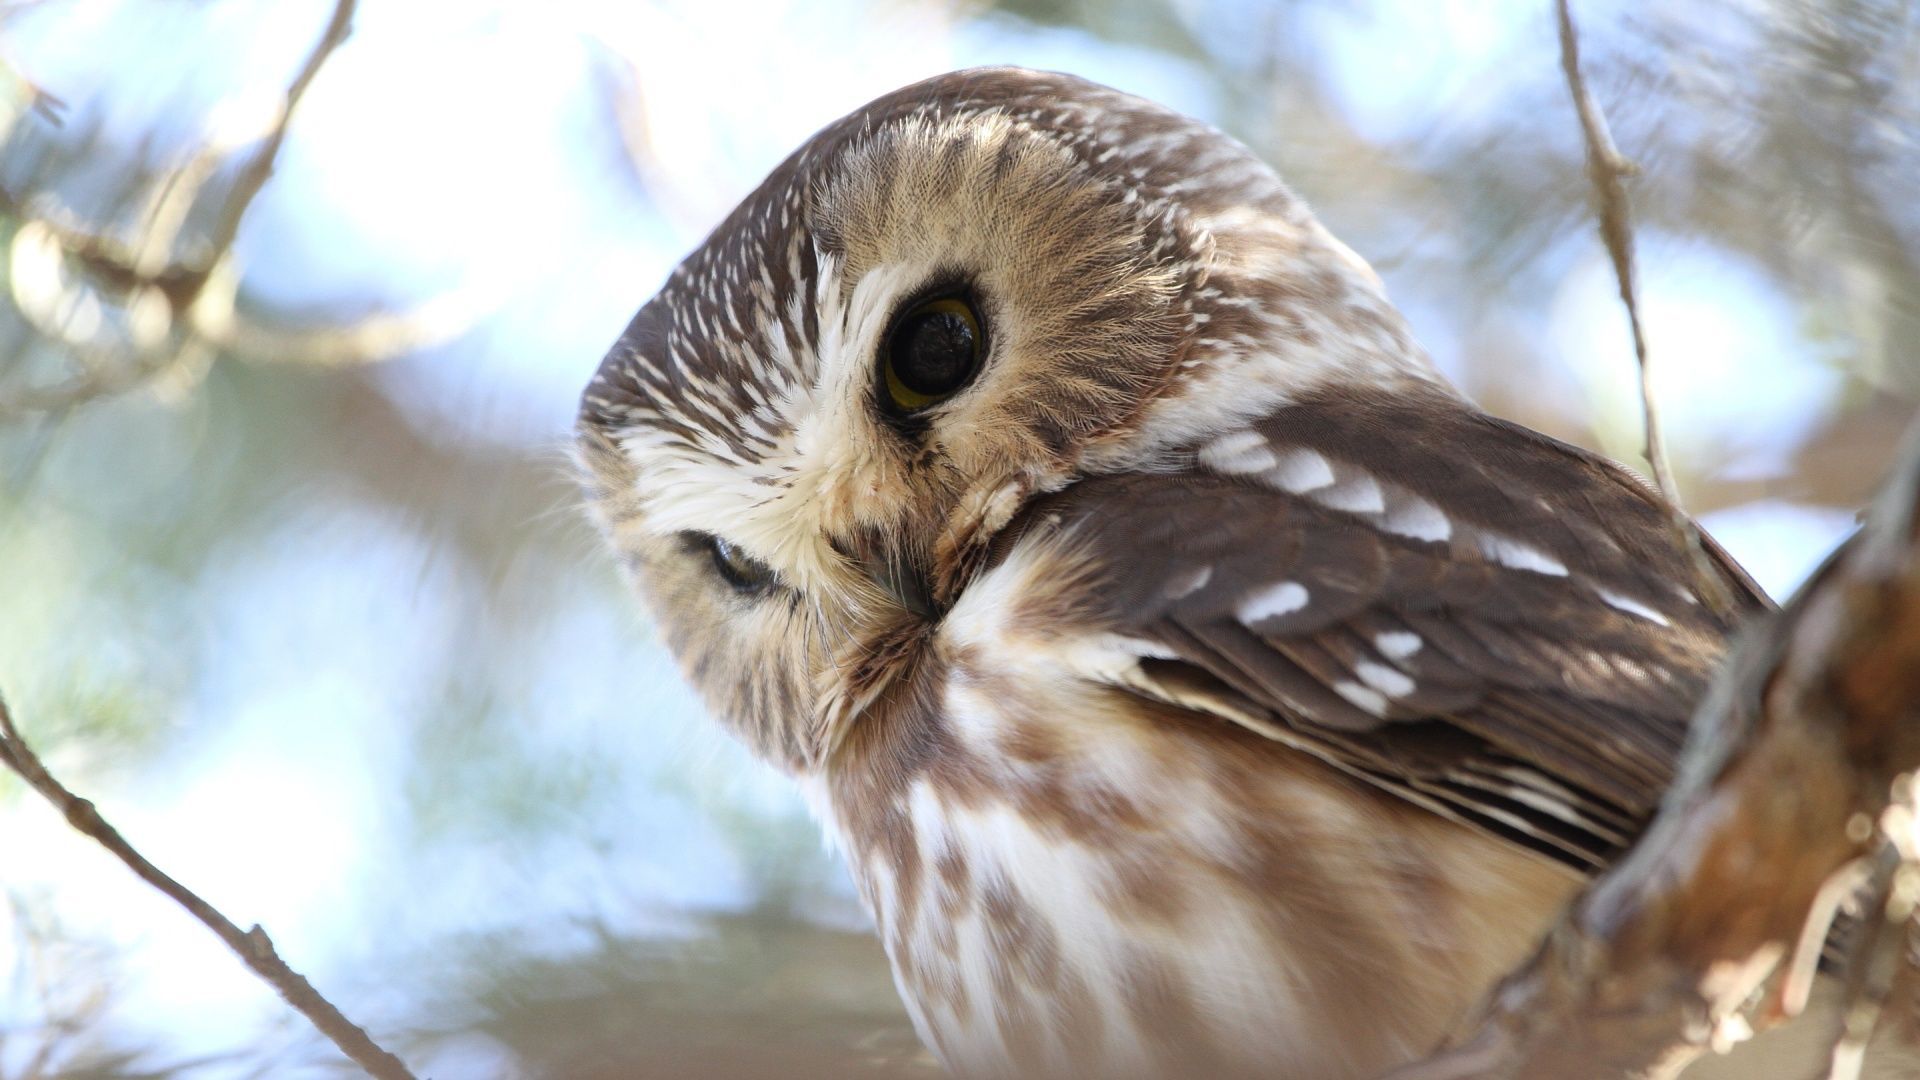 Cute Owl Picture Free Download. Owl wallpaper, Cute owls wallpaper, Owl picture